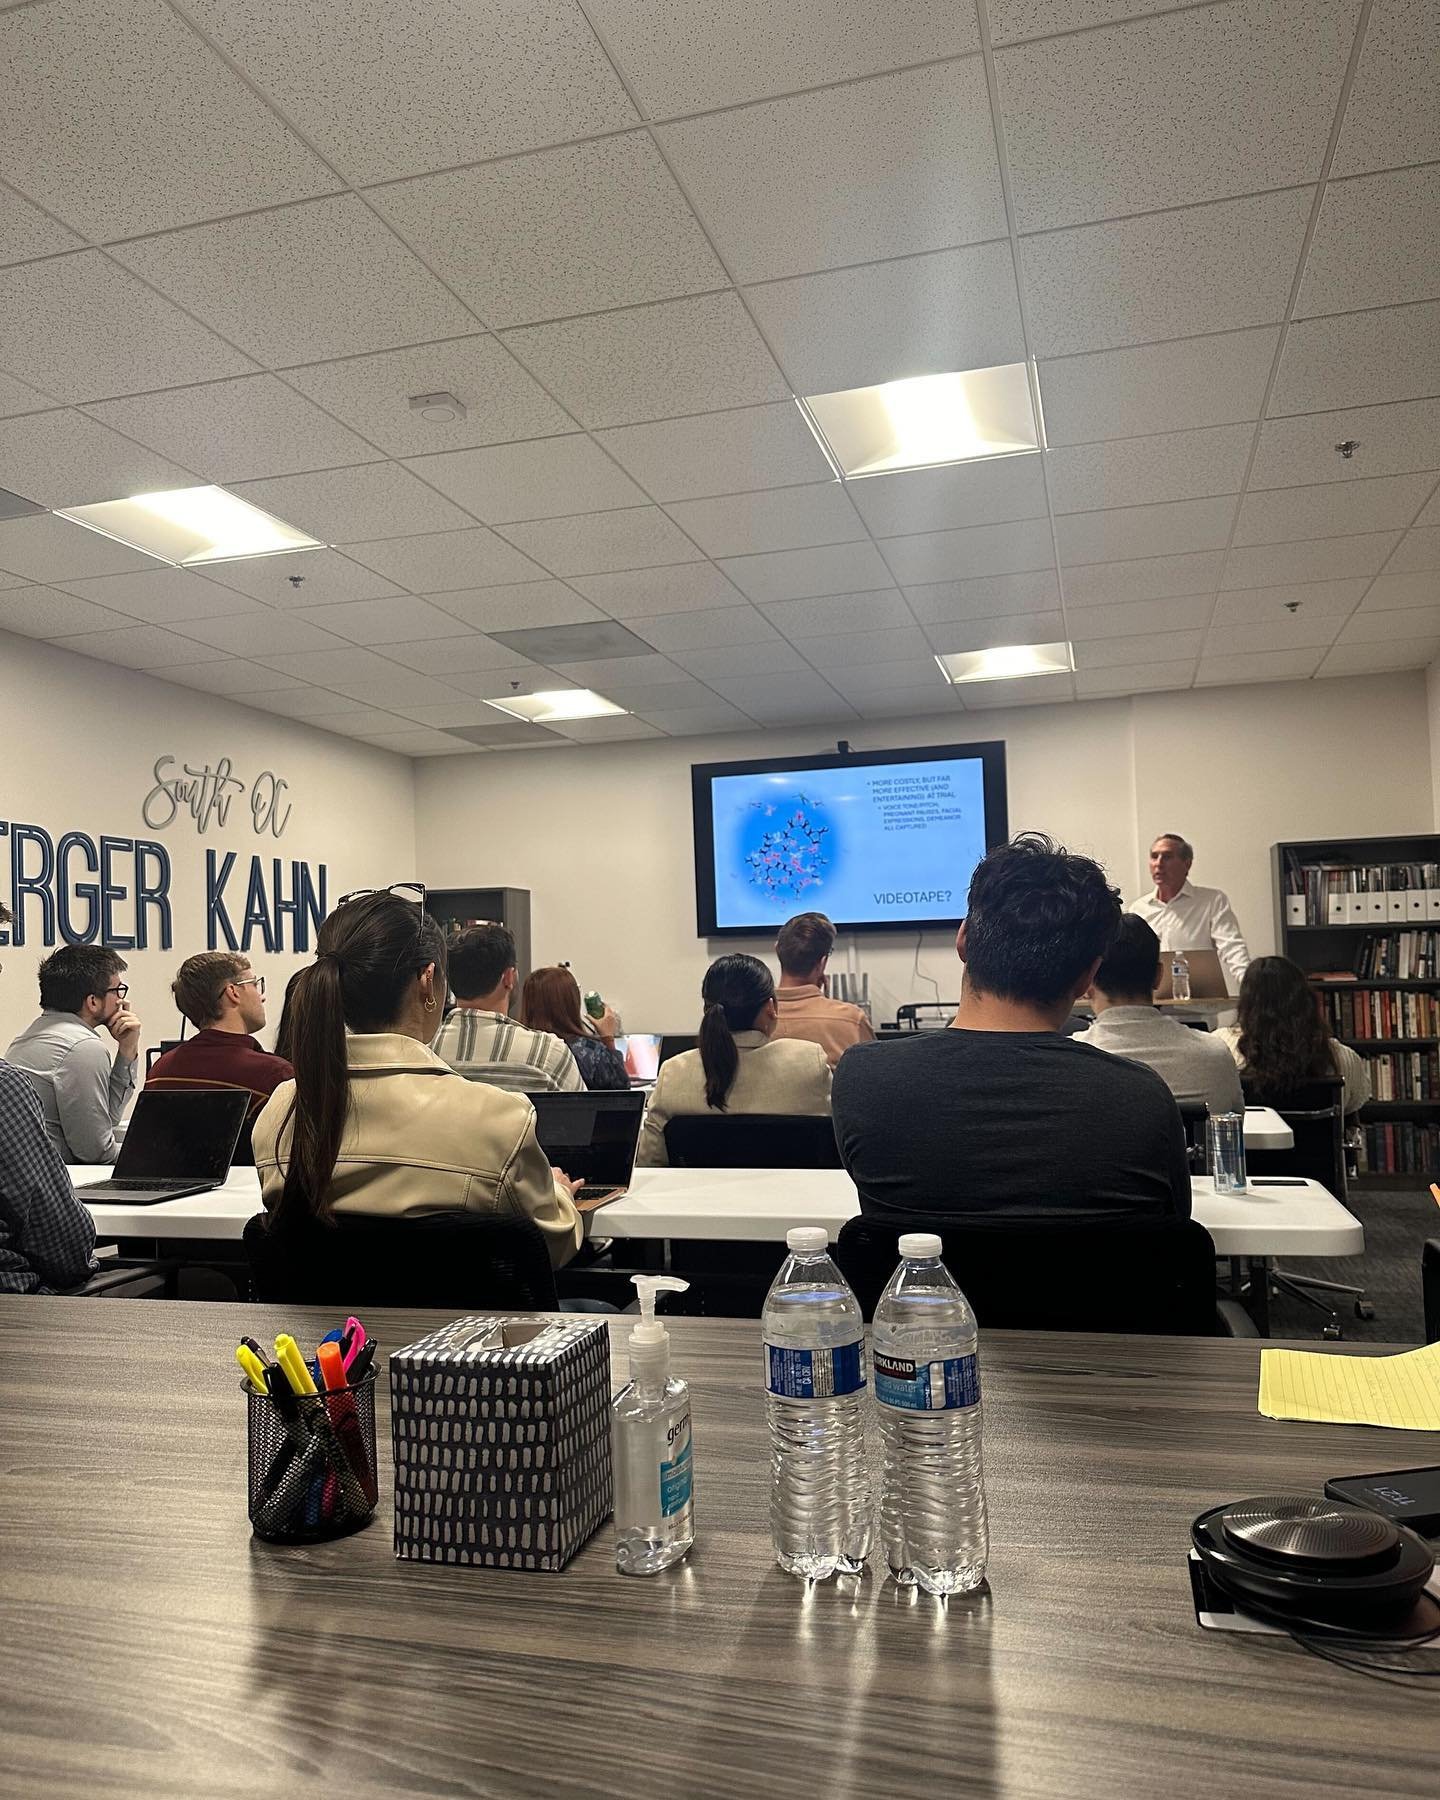 Former Berger Kahn partner, Sherman Spitz, stopped by the firm to give an insightful presentation on depositions. Thanks, Sherm!